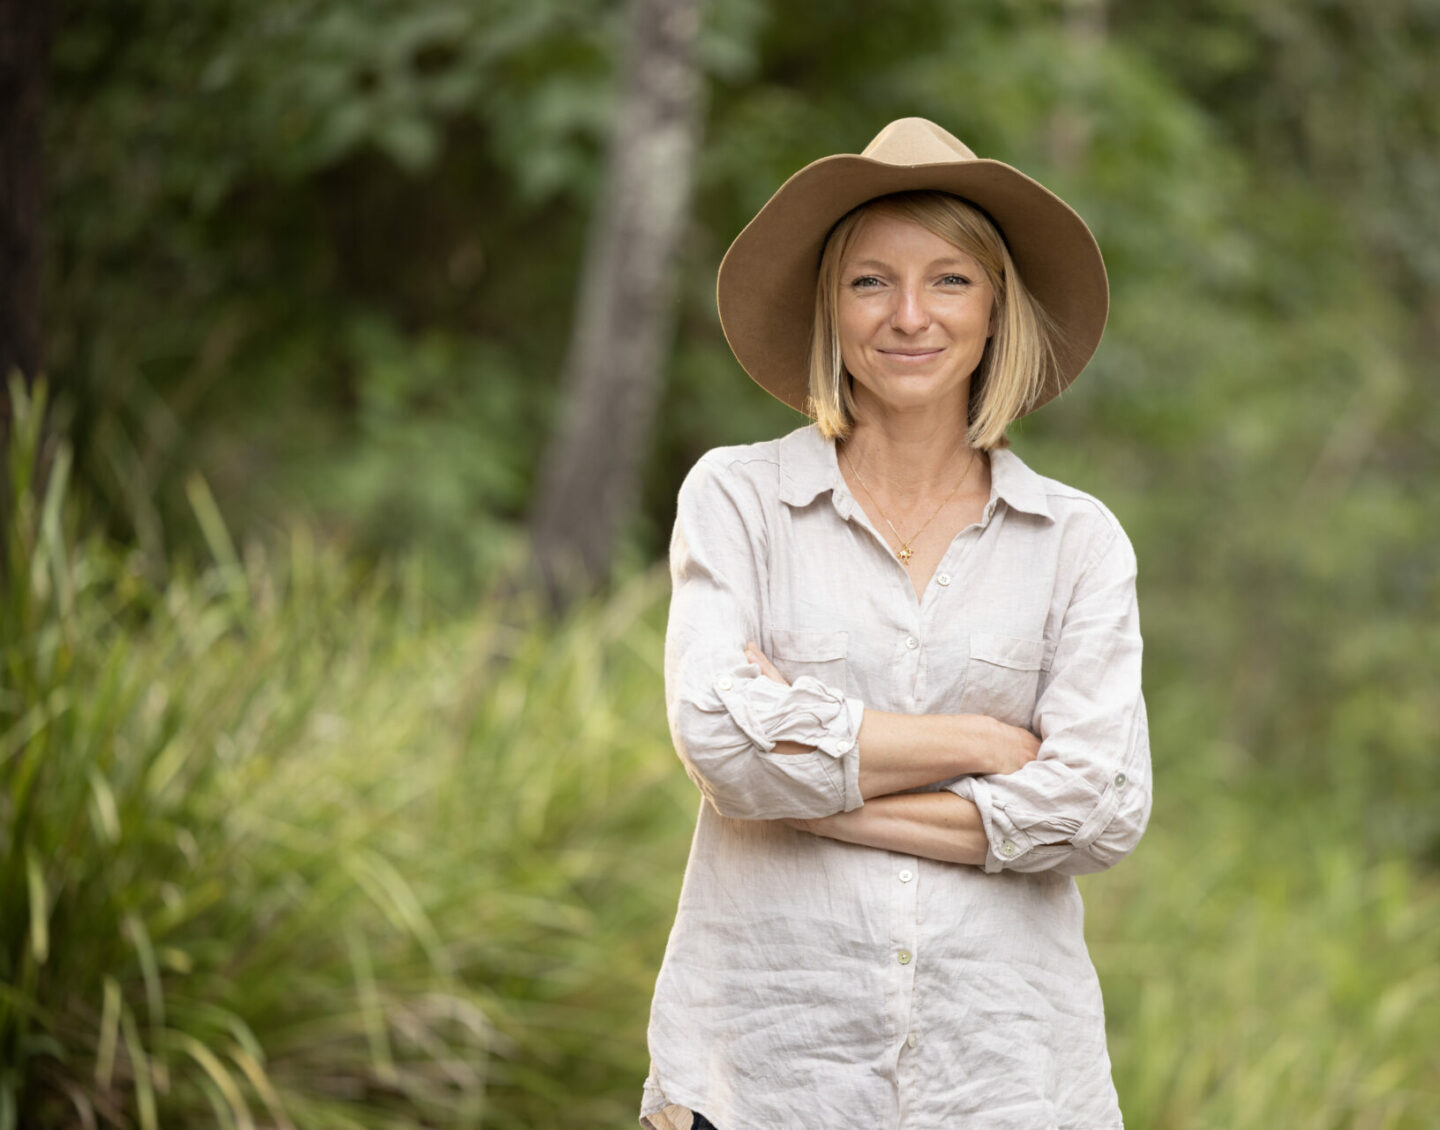 A blonde woman in a wide-brimmed hat stands outdoors, arms-folded and smiling